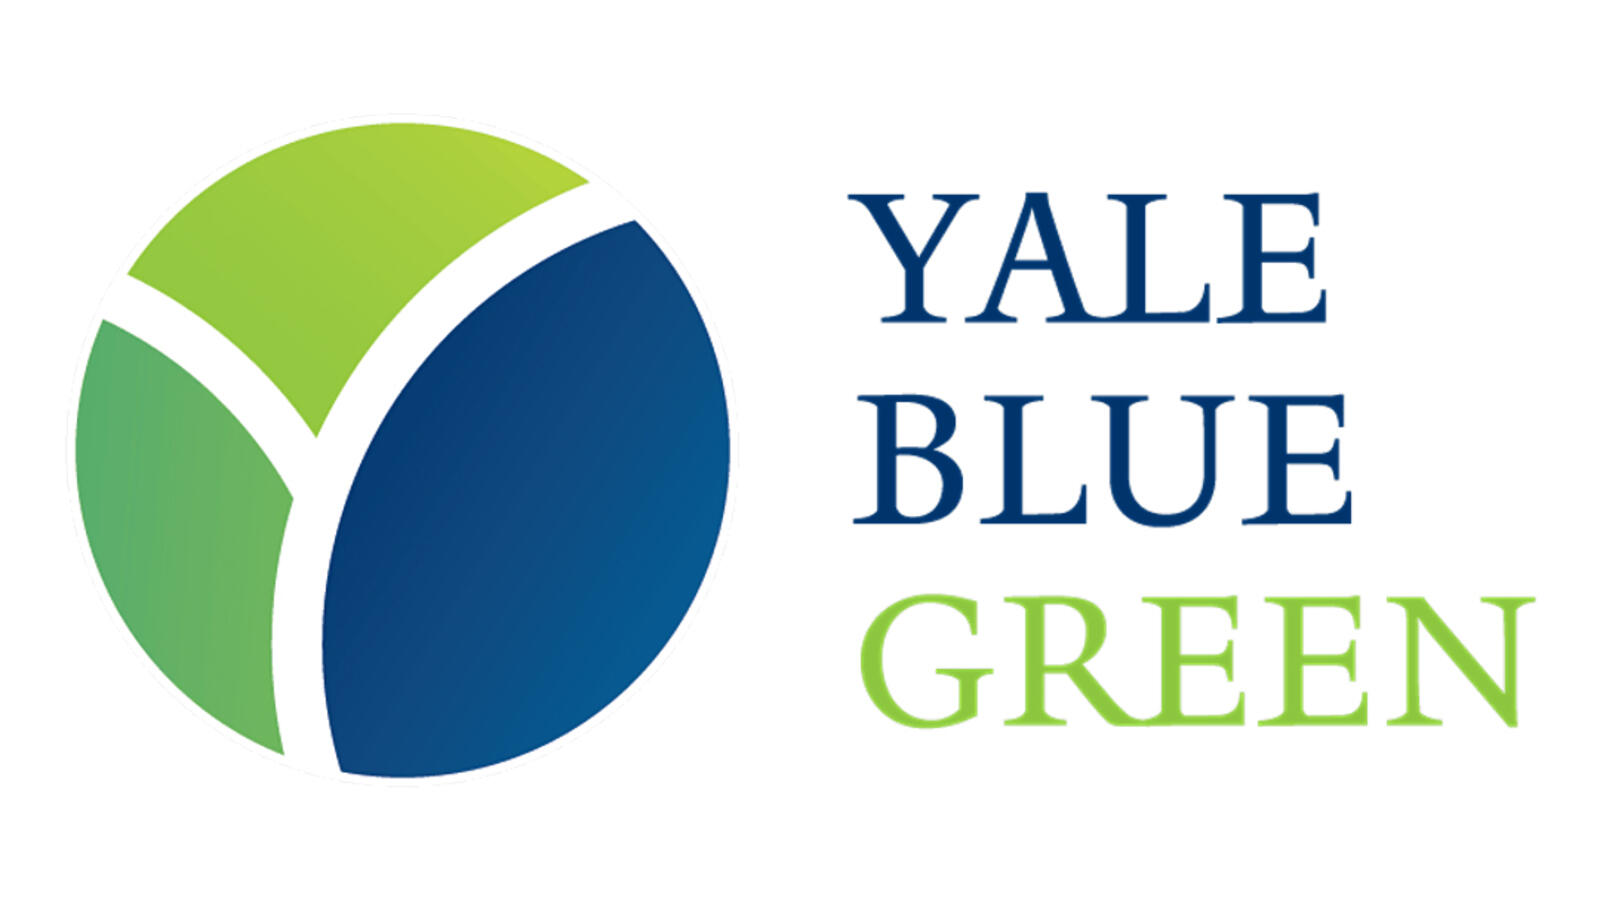 The logo for the YAA shared interest group Yale Blue Green